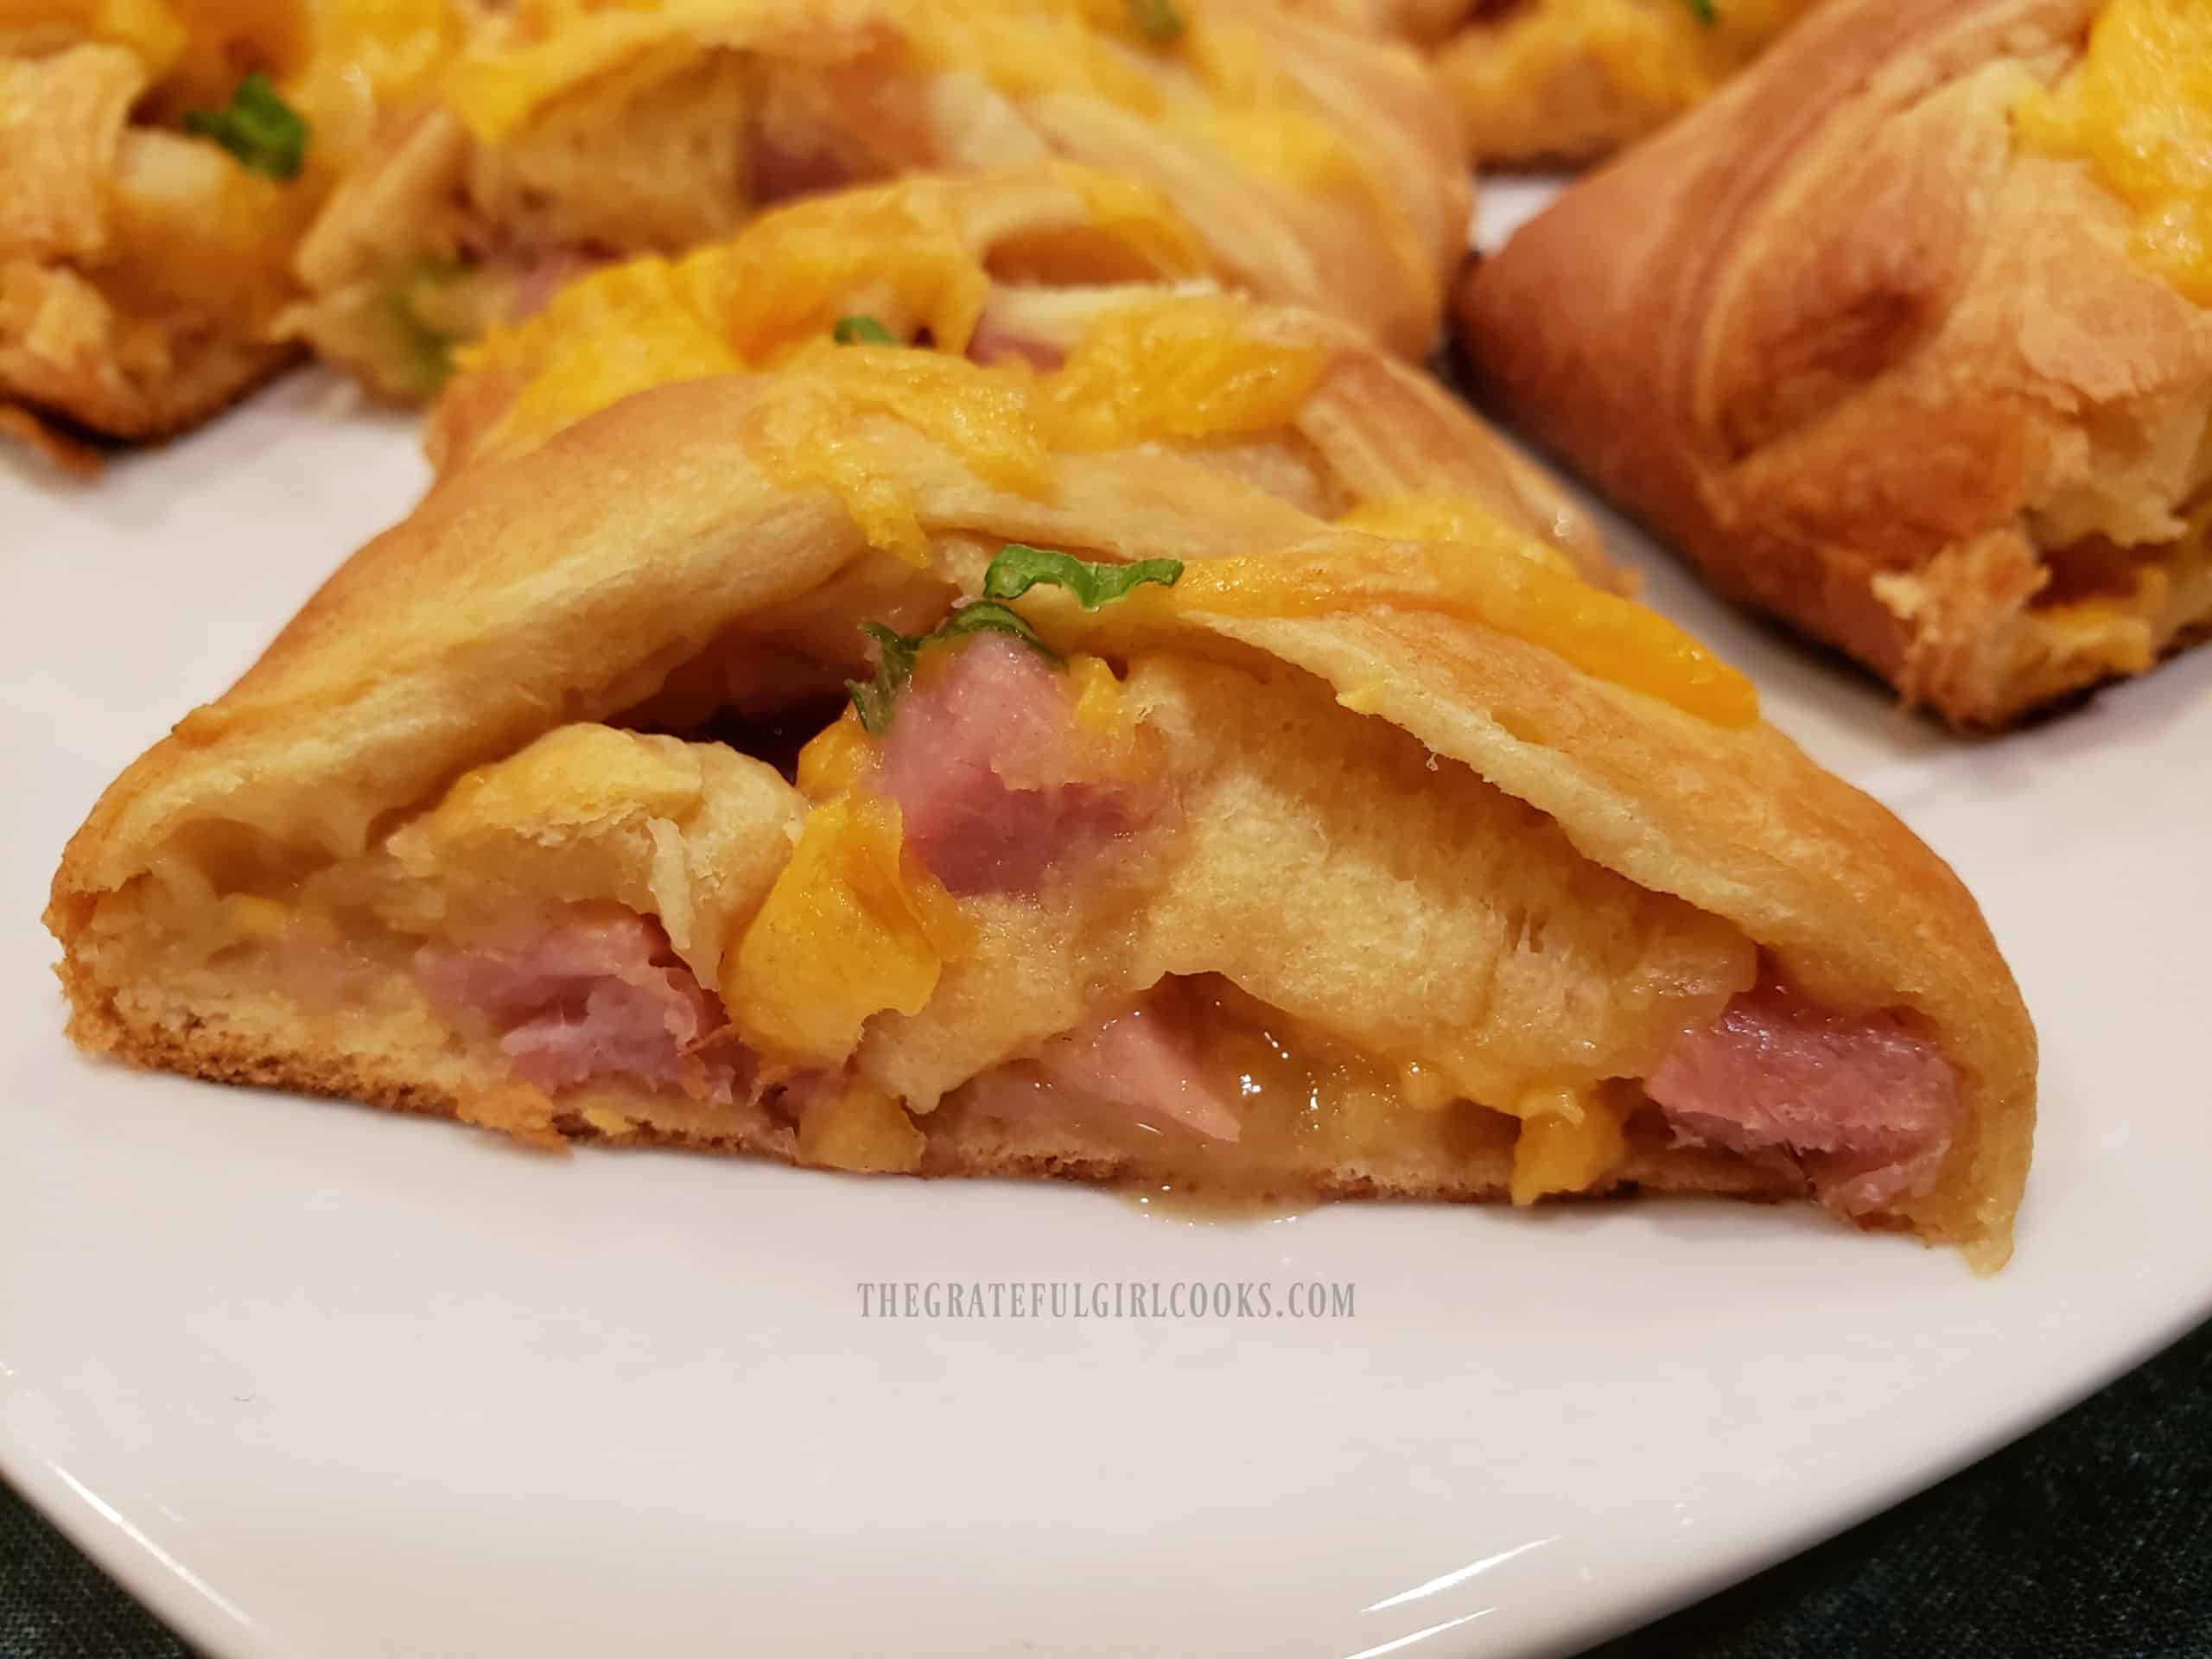 You can see meat and cheese inside one of the ham 'n cheese crescent bites..